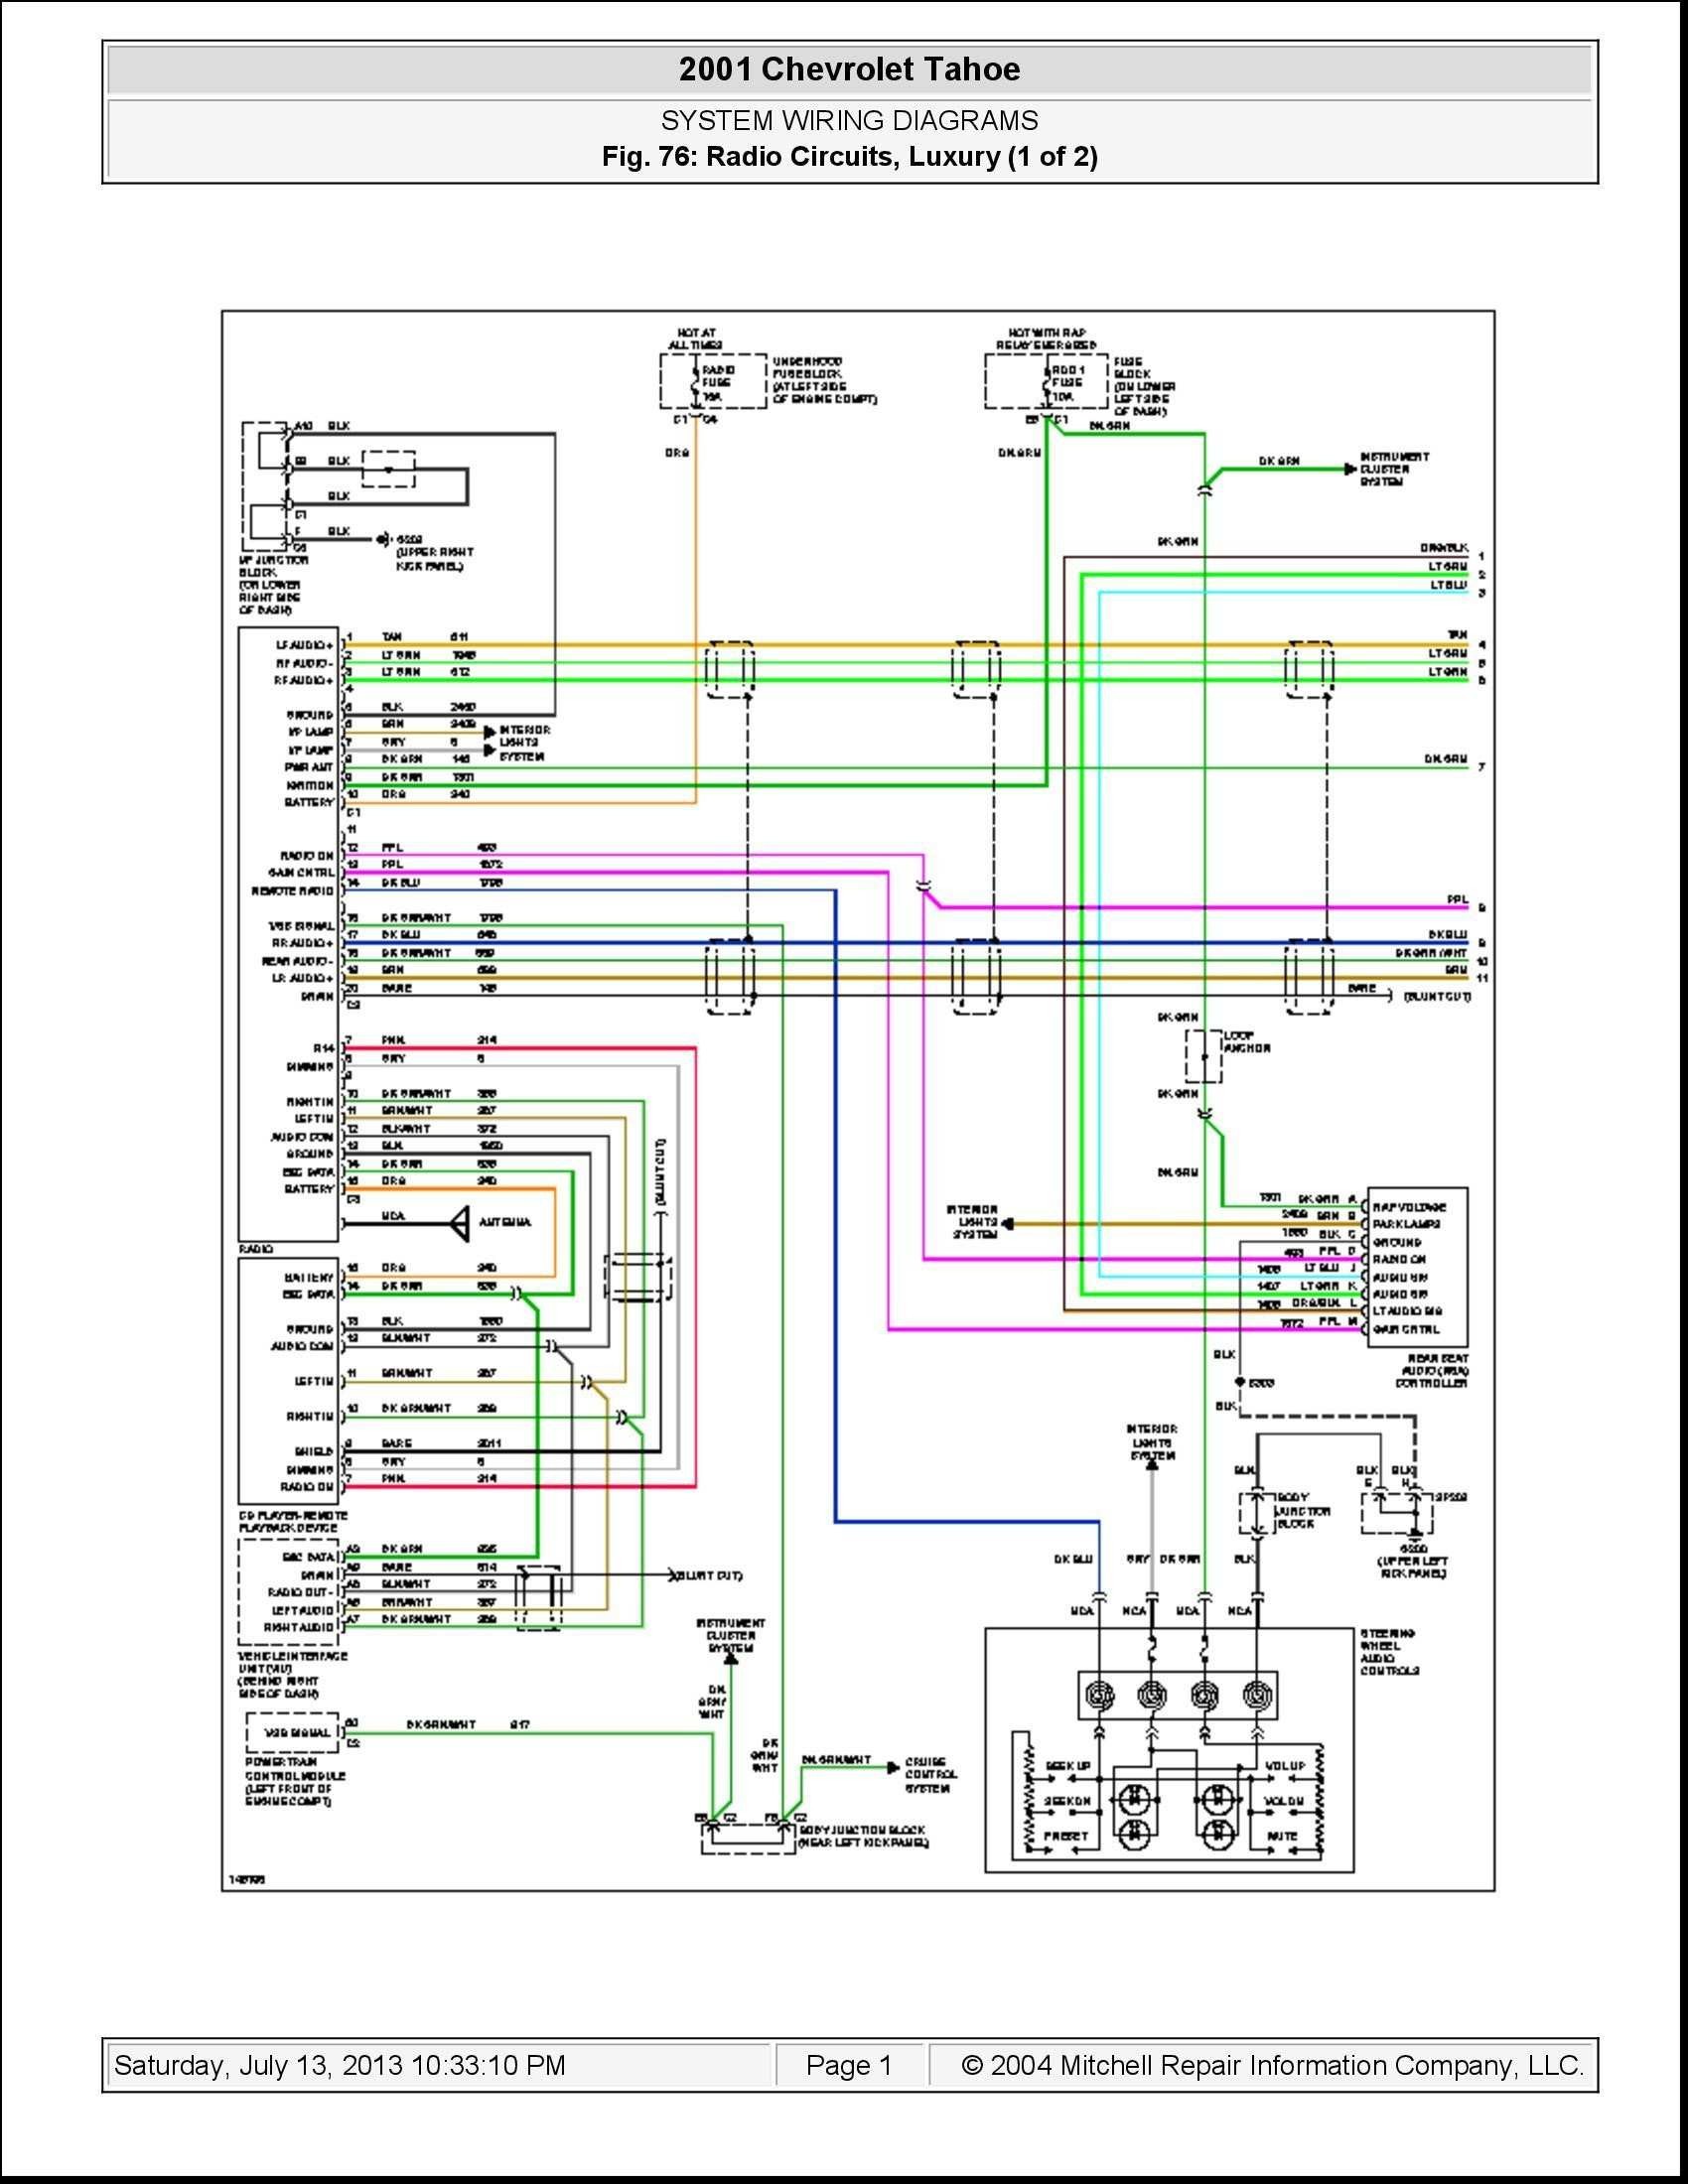 Chevy Radio Wiring Diagram Electrical Circuit 2004 Chevy Silverado Radio Wiring Harness Diagram Best 2005 Chevy